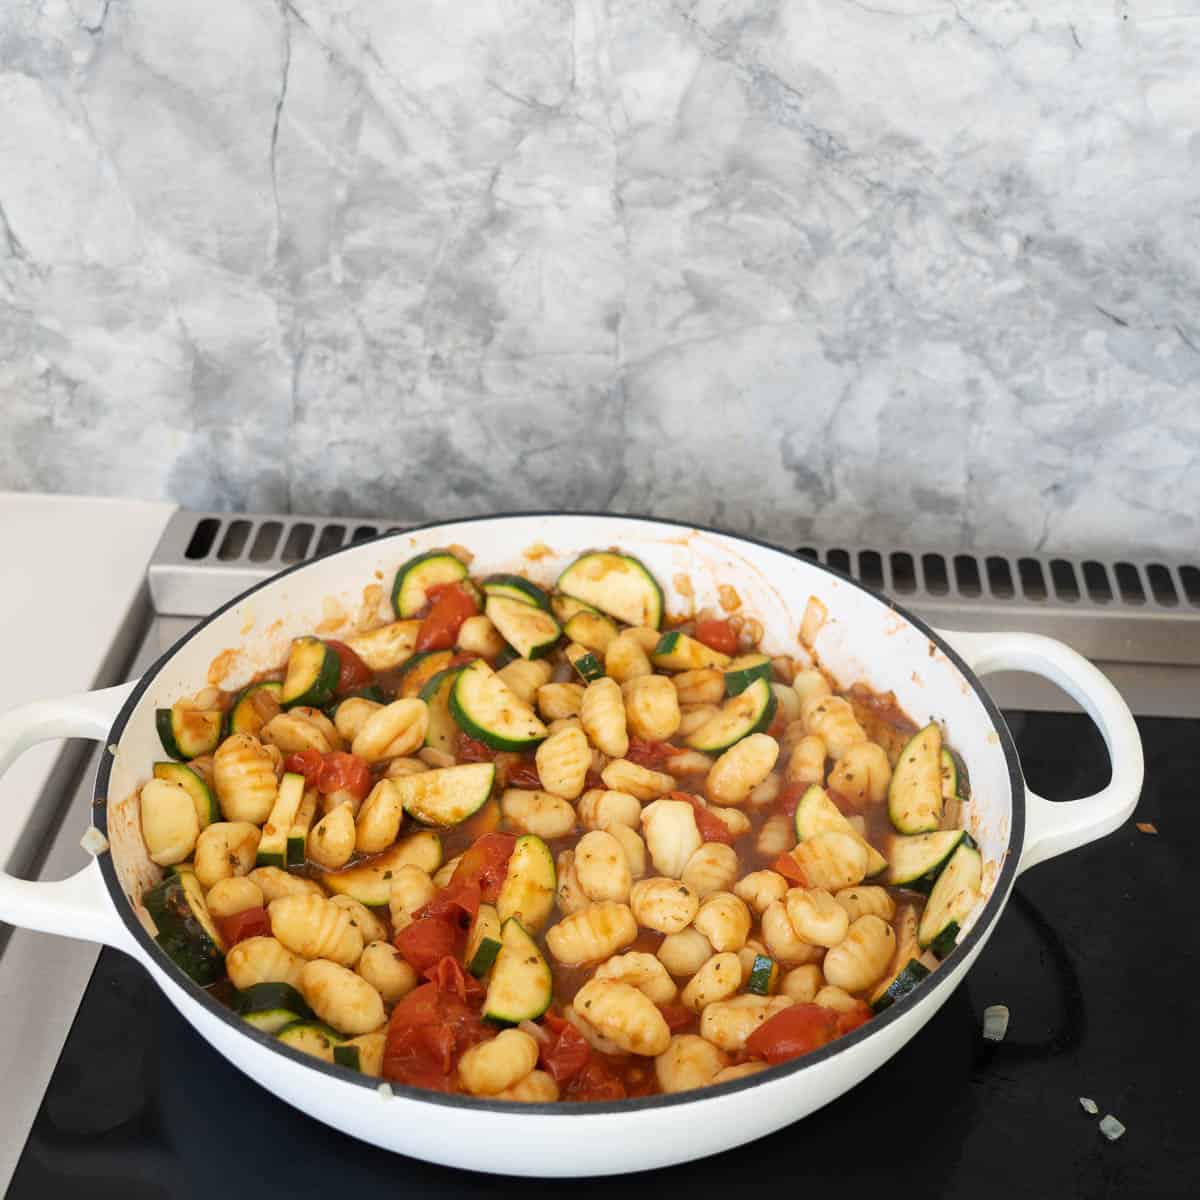 Gnocchi in a tomato and vegetable sauce in a large white casserole dish.